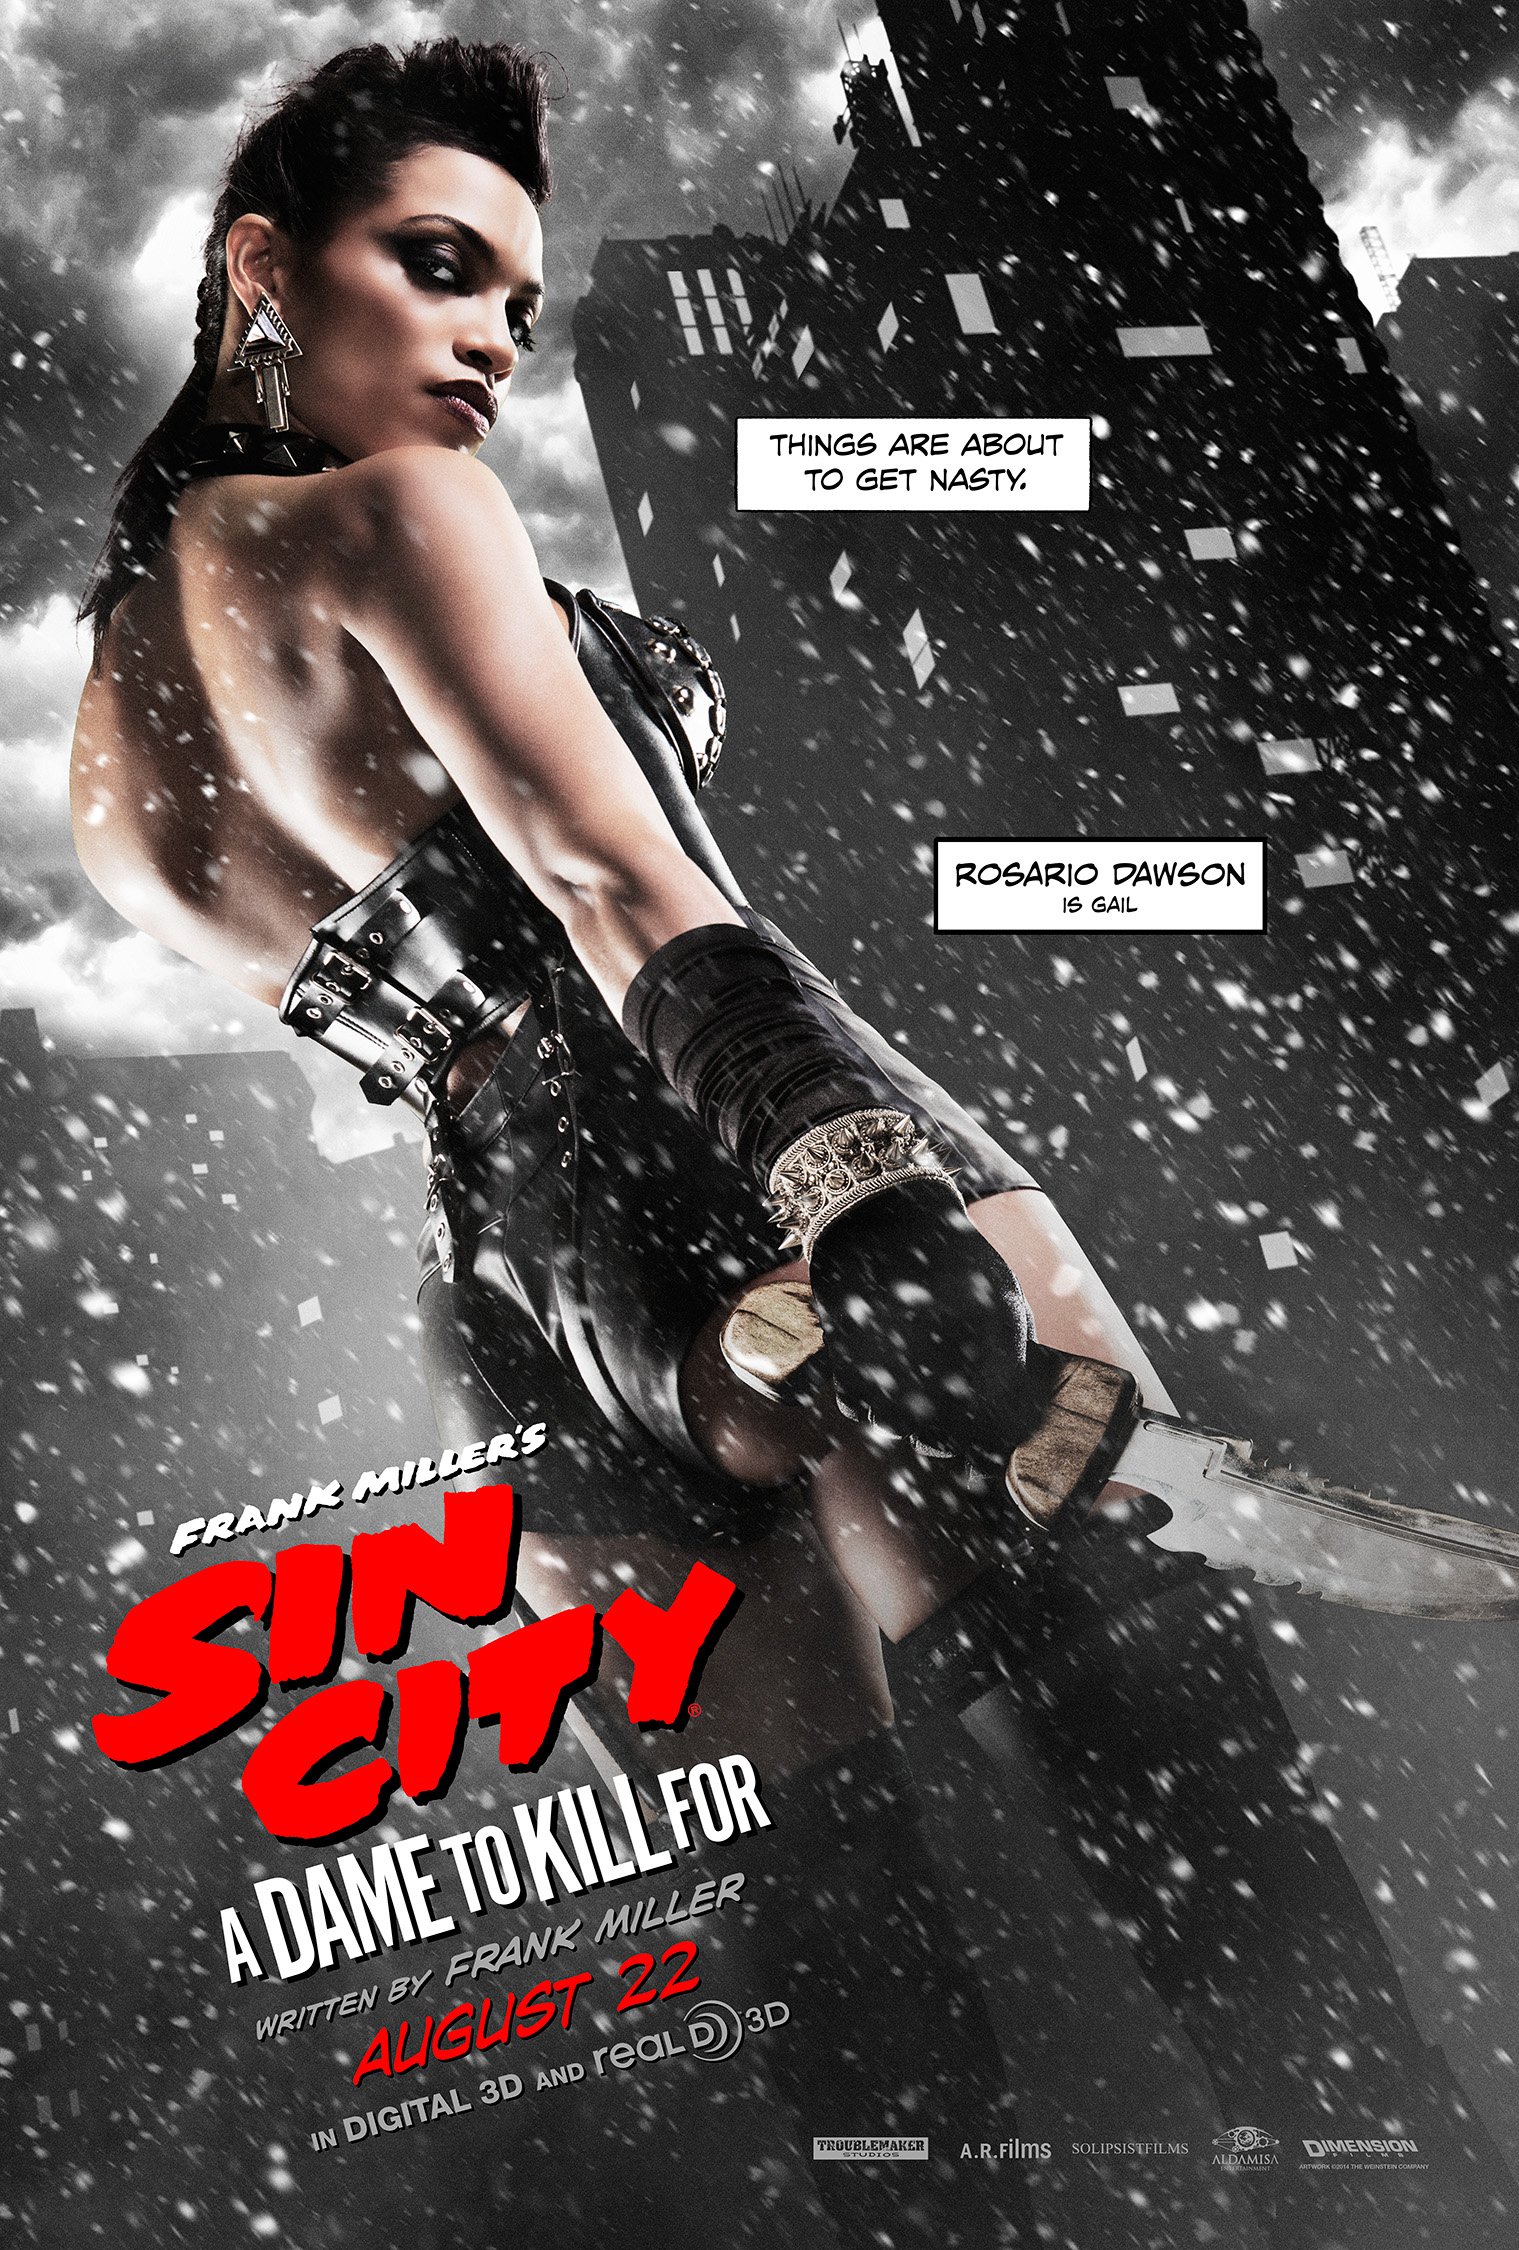 Rosario-Dawson-Sin-City-A-Dame-To-Kill-For-character-poster-02.jpg